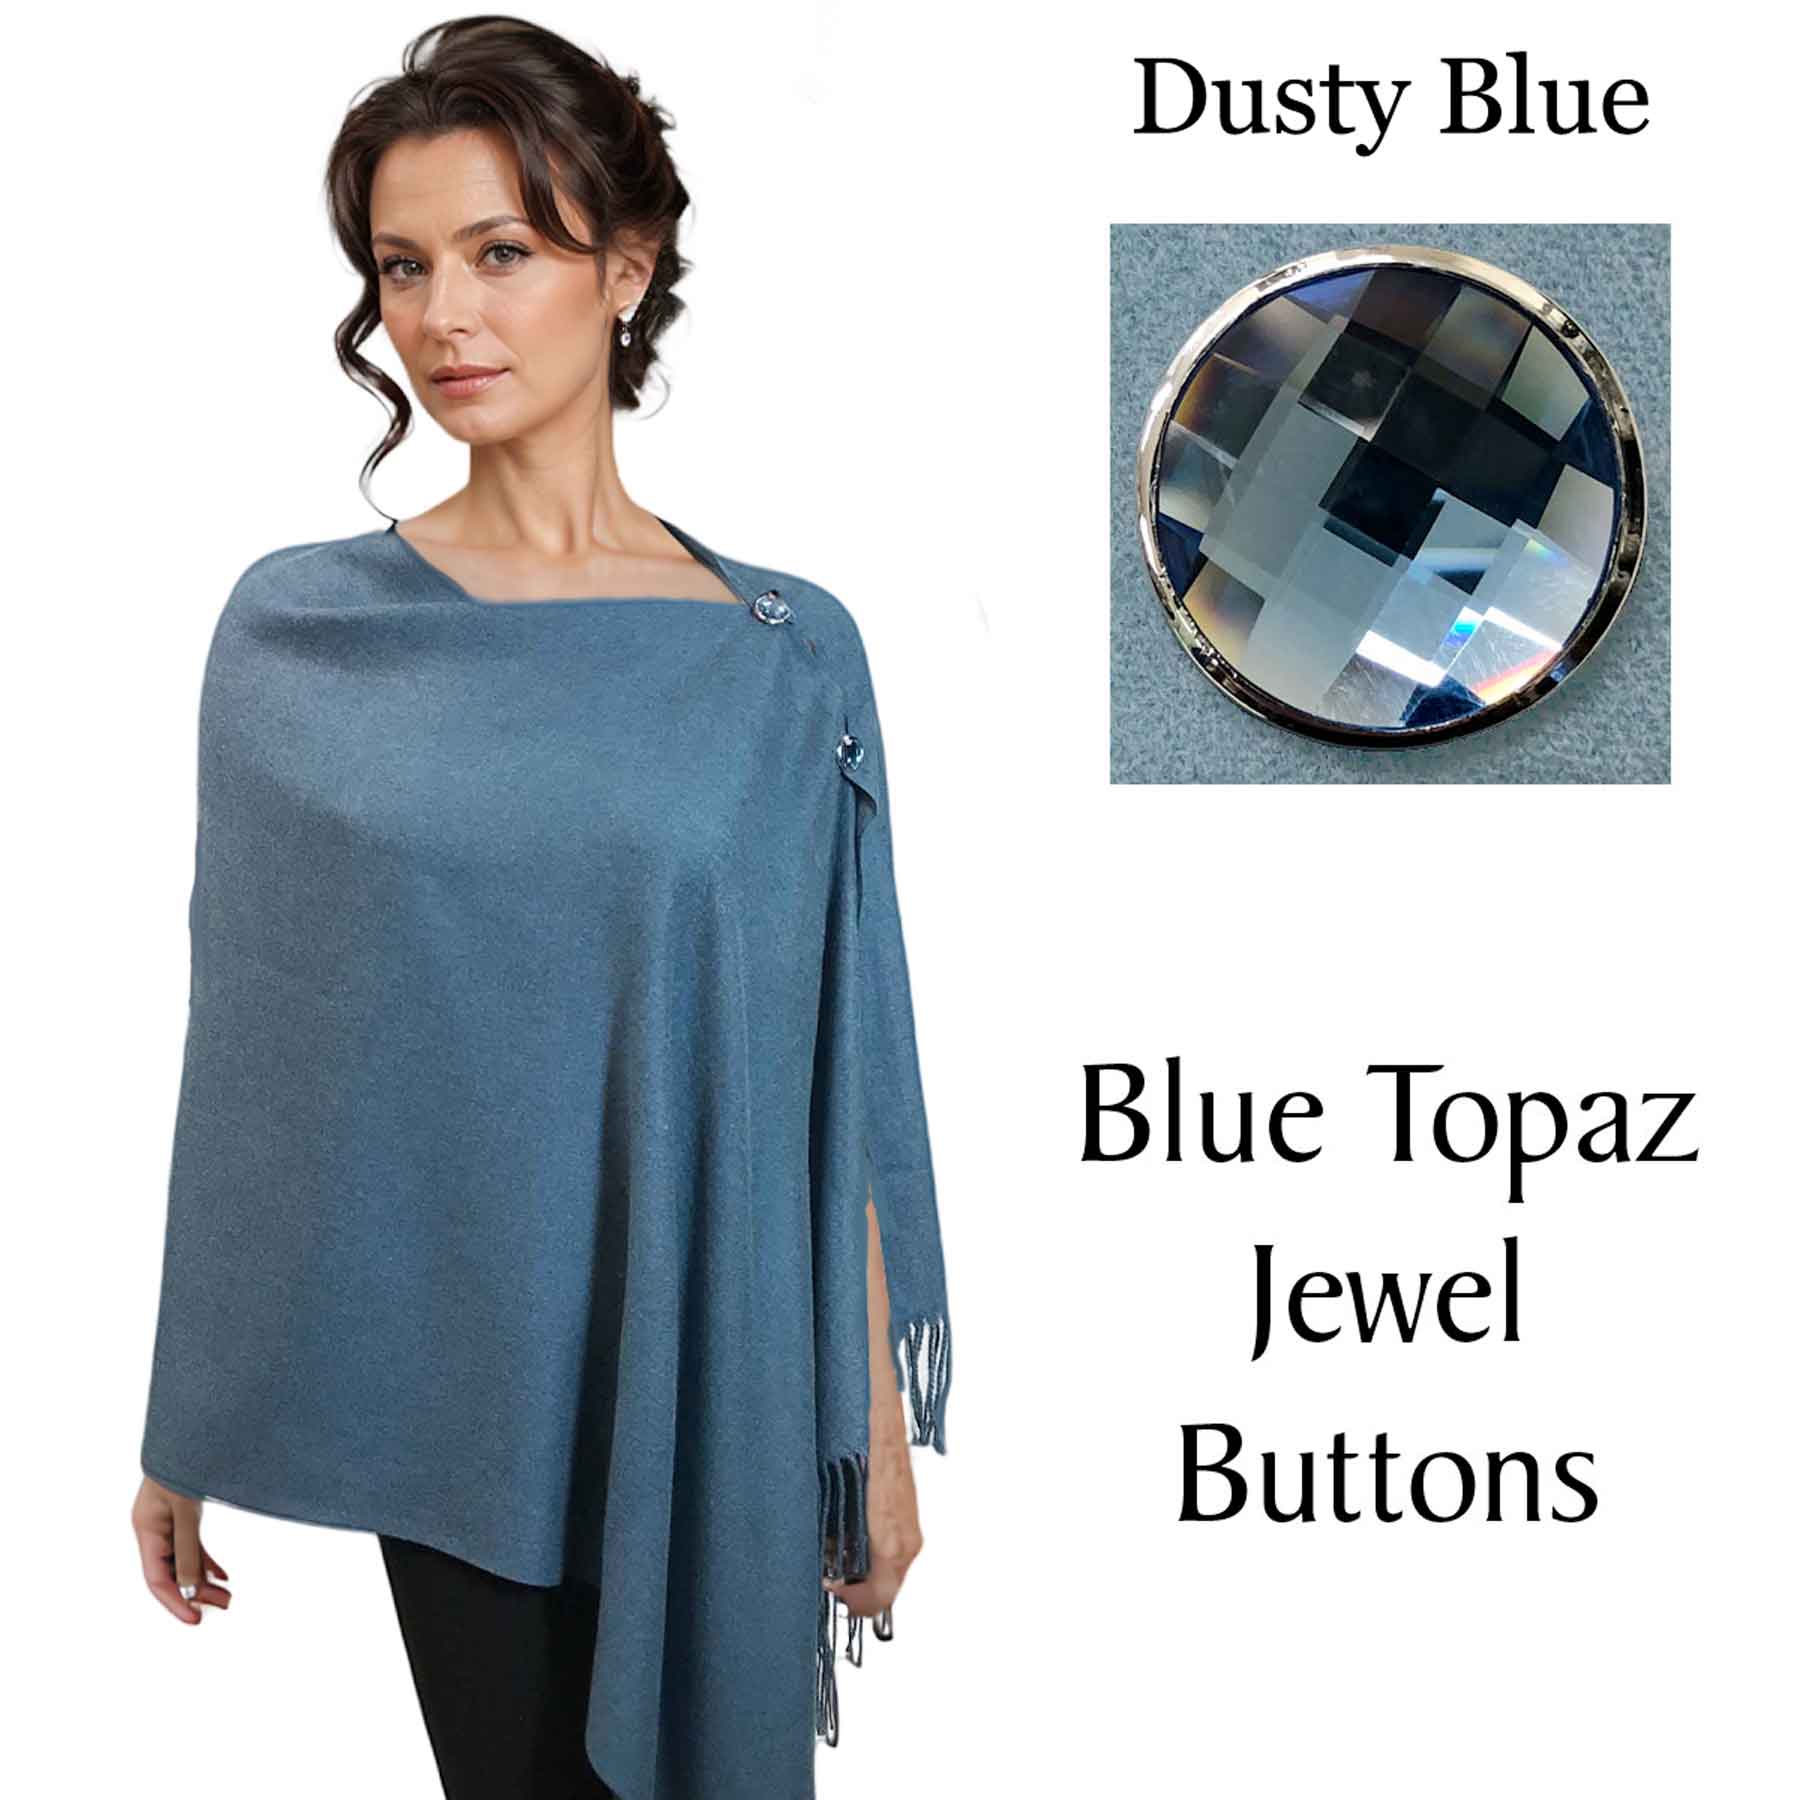 #25 Dusty Blue with Blue Topaz Jewel Buttons 